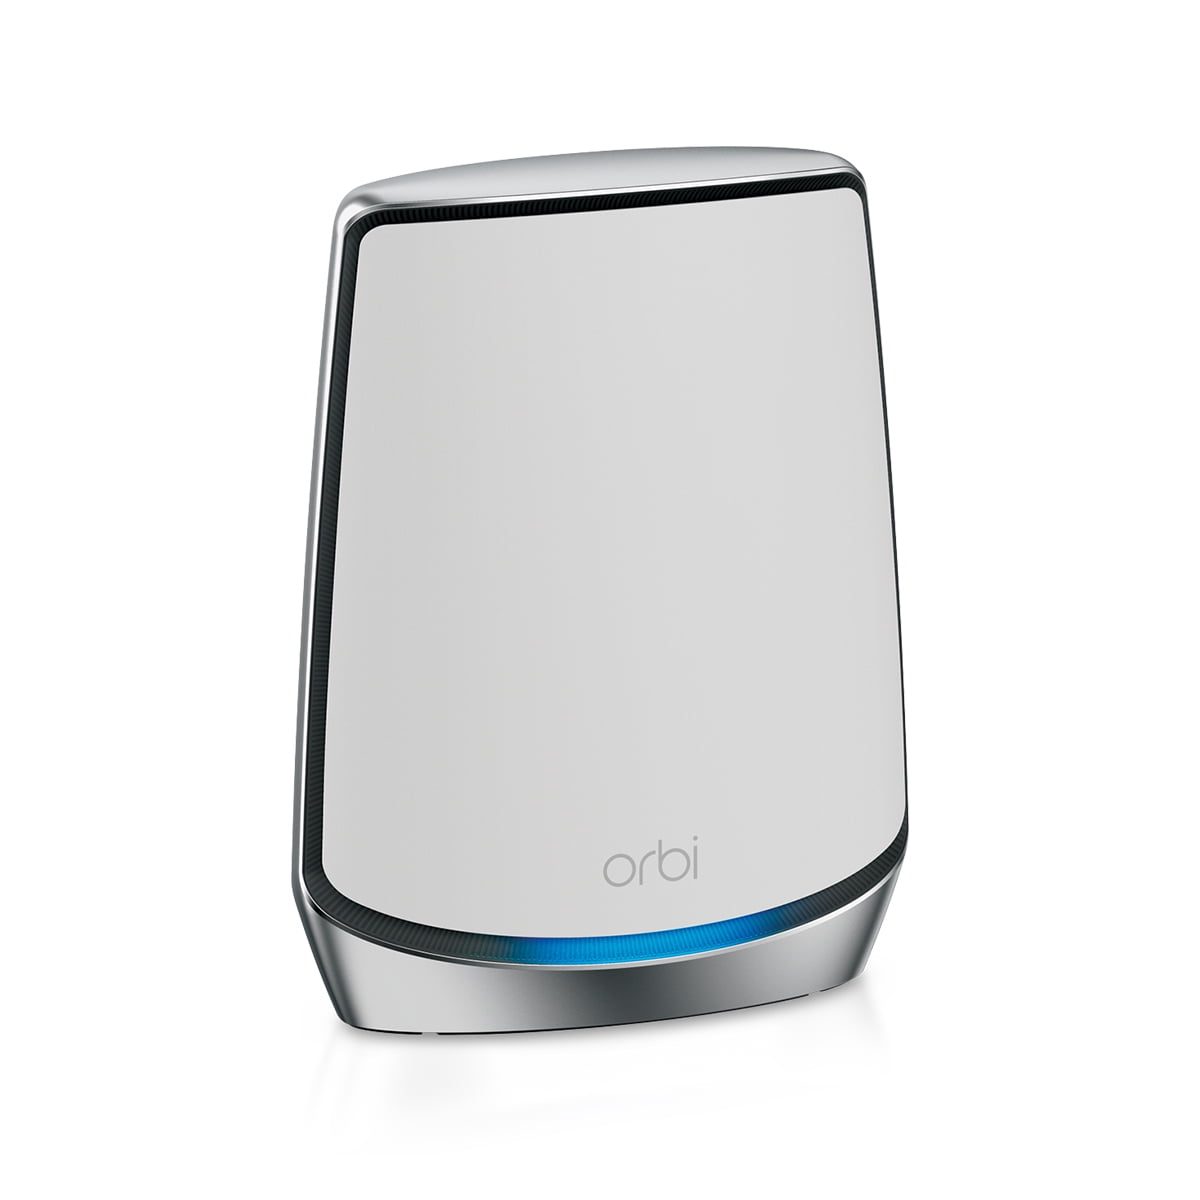 NETGEAR - Orbi AX6000 Tri-Band Mesh WiFi 6 Add-on Satellite Extender, up to  6Gbps (RBS850) 